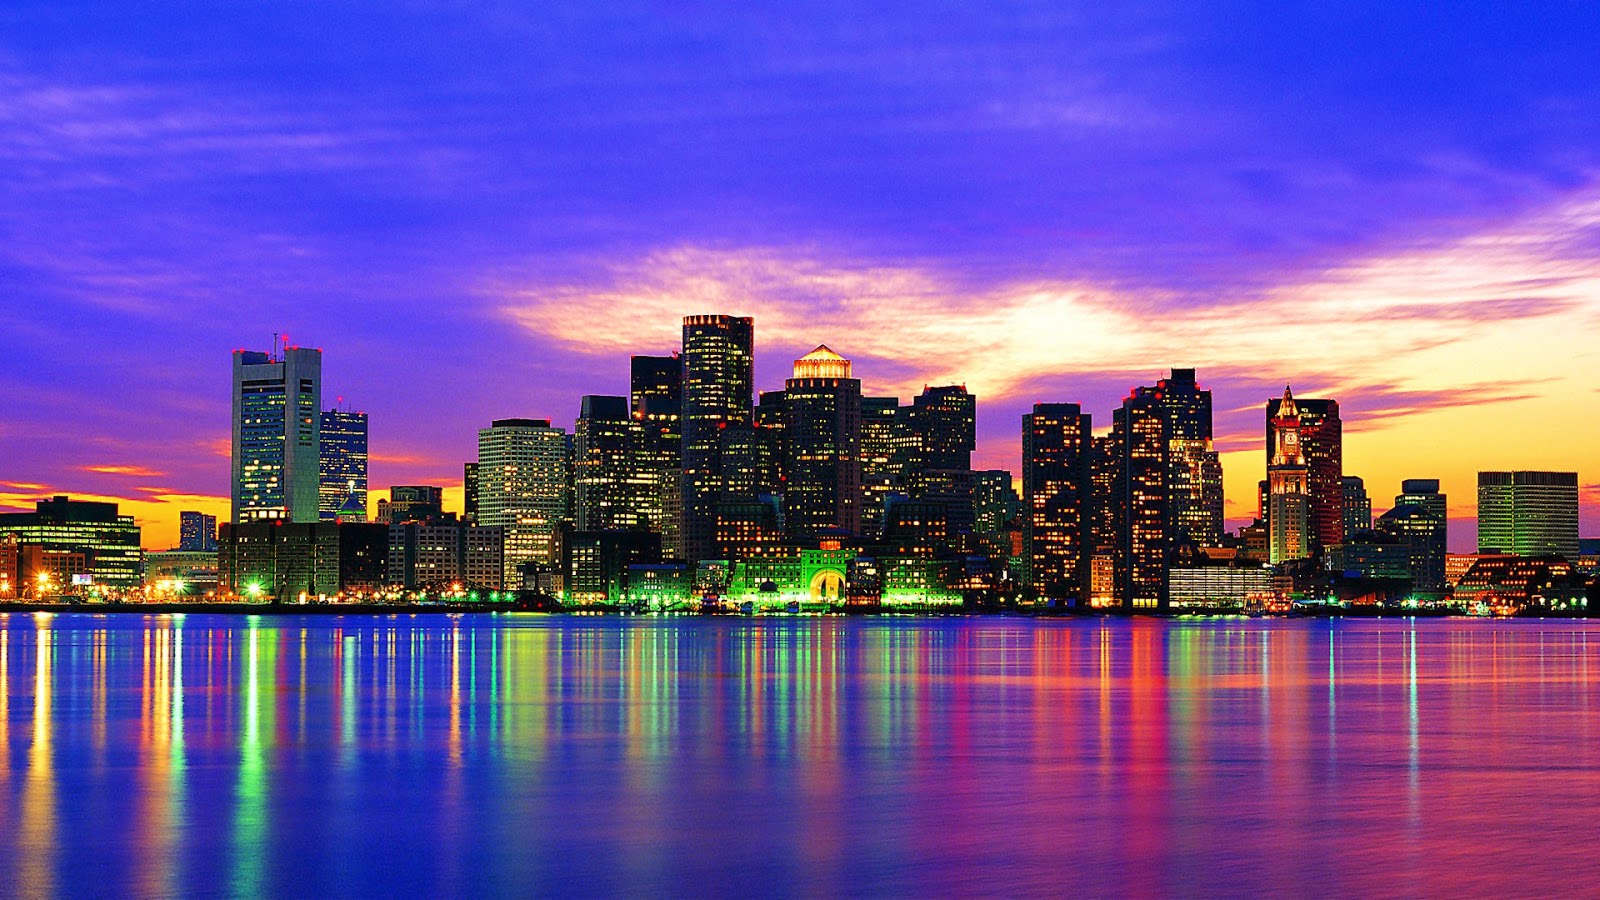 Colorful City Wallpaper On